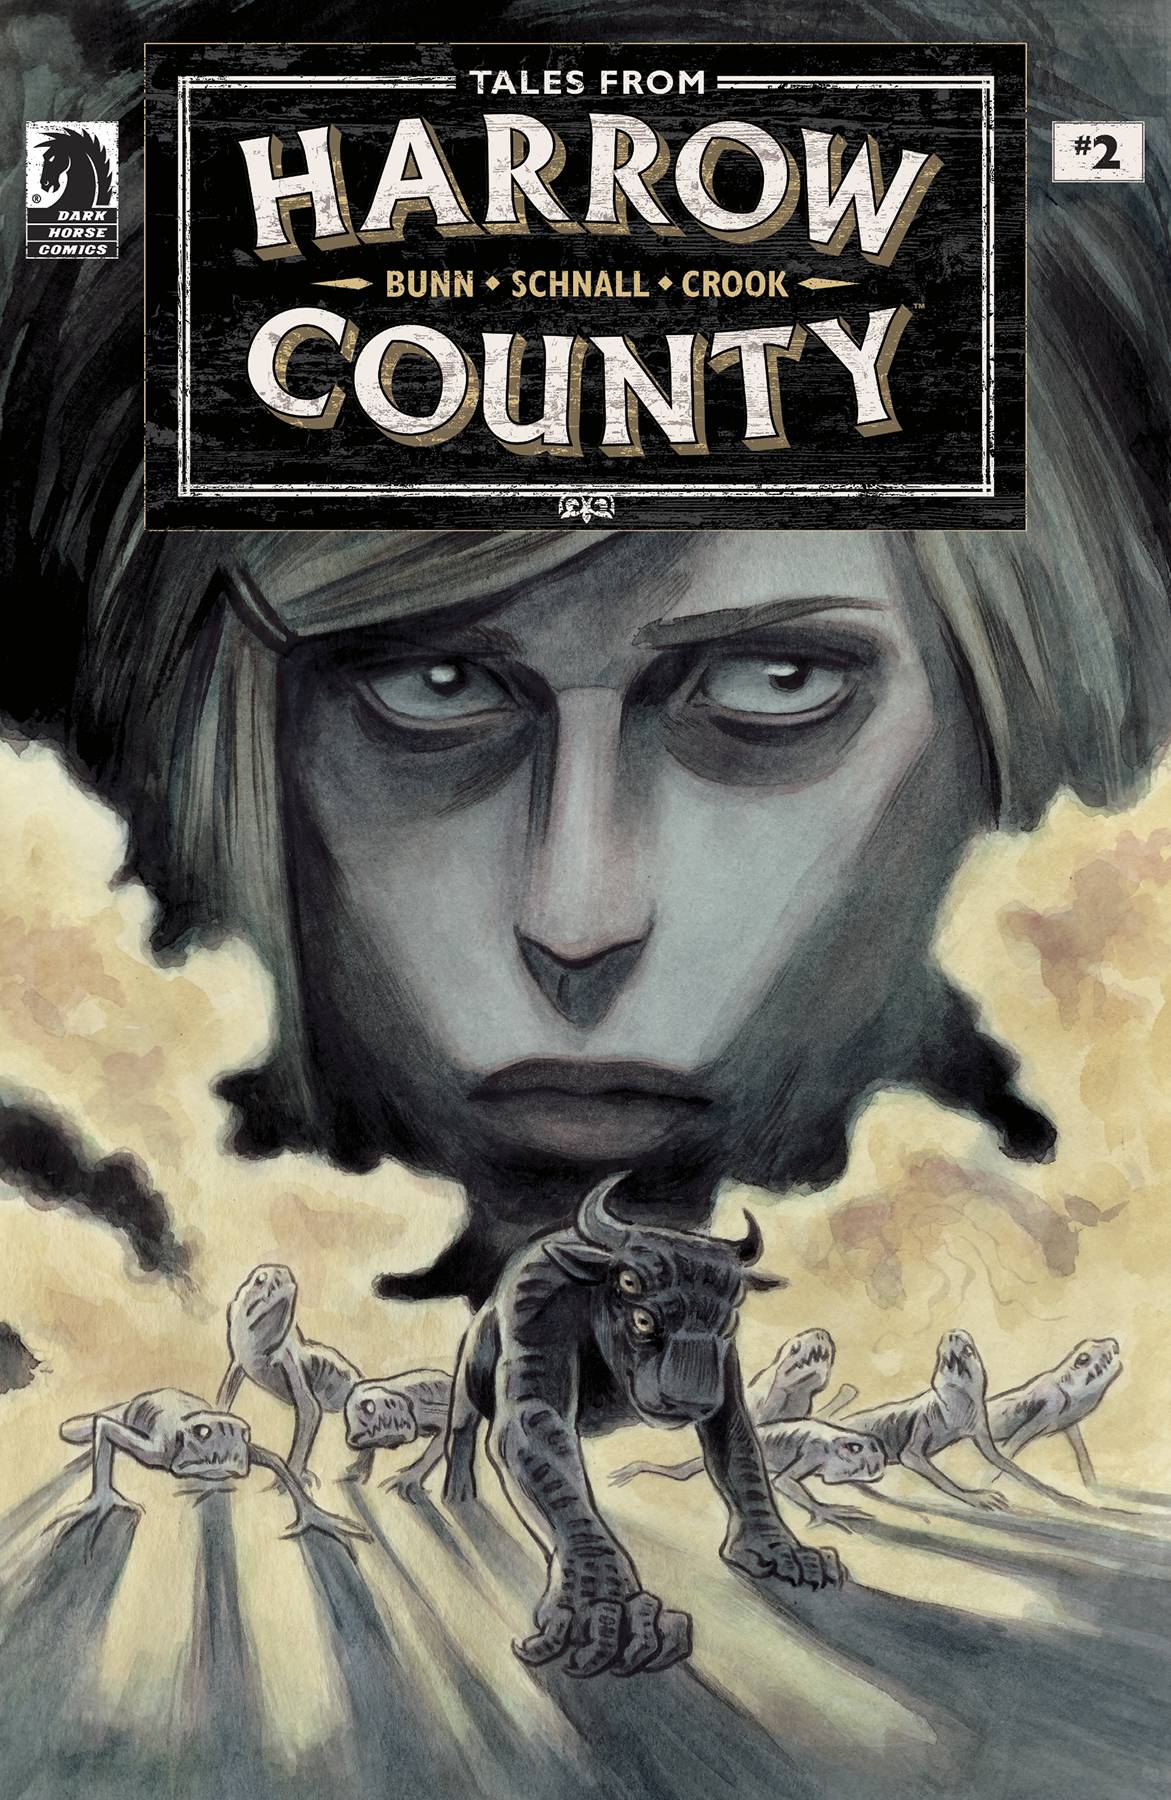 TALES FROM HARROW COUNTY LOST ONES #2 (OF 4) CVR A SCHNALL